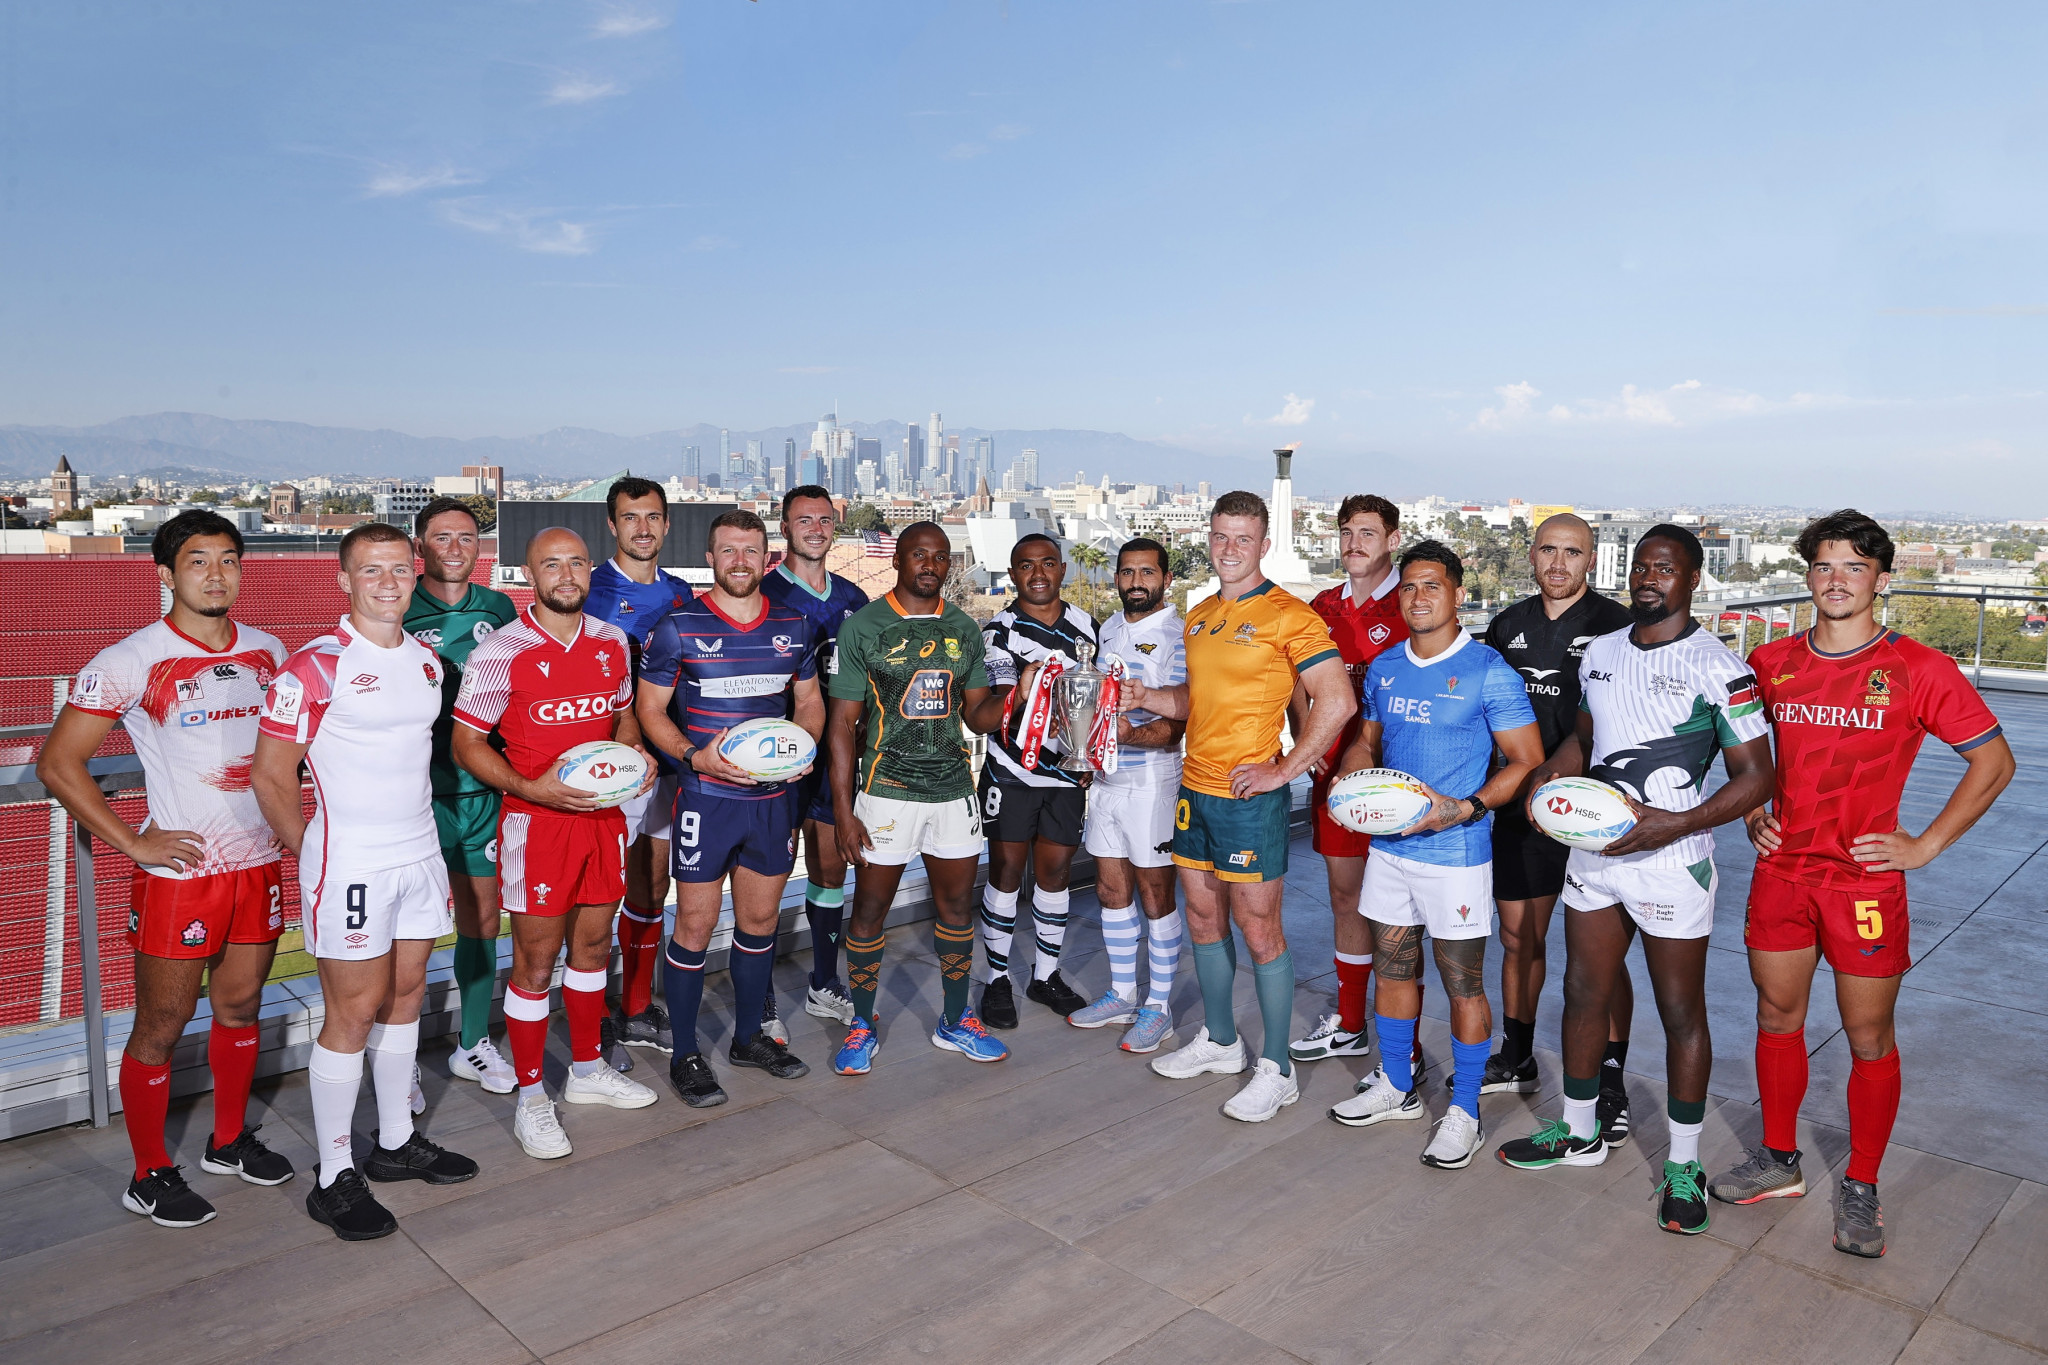 South Africa, Australia, Argentina and Fiji have a chance of winning this season's World Rugby Sevens Series crown ©World Rugby